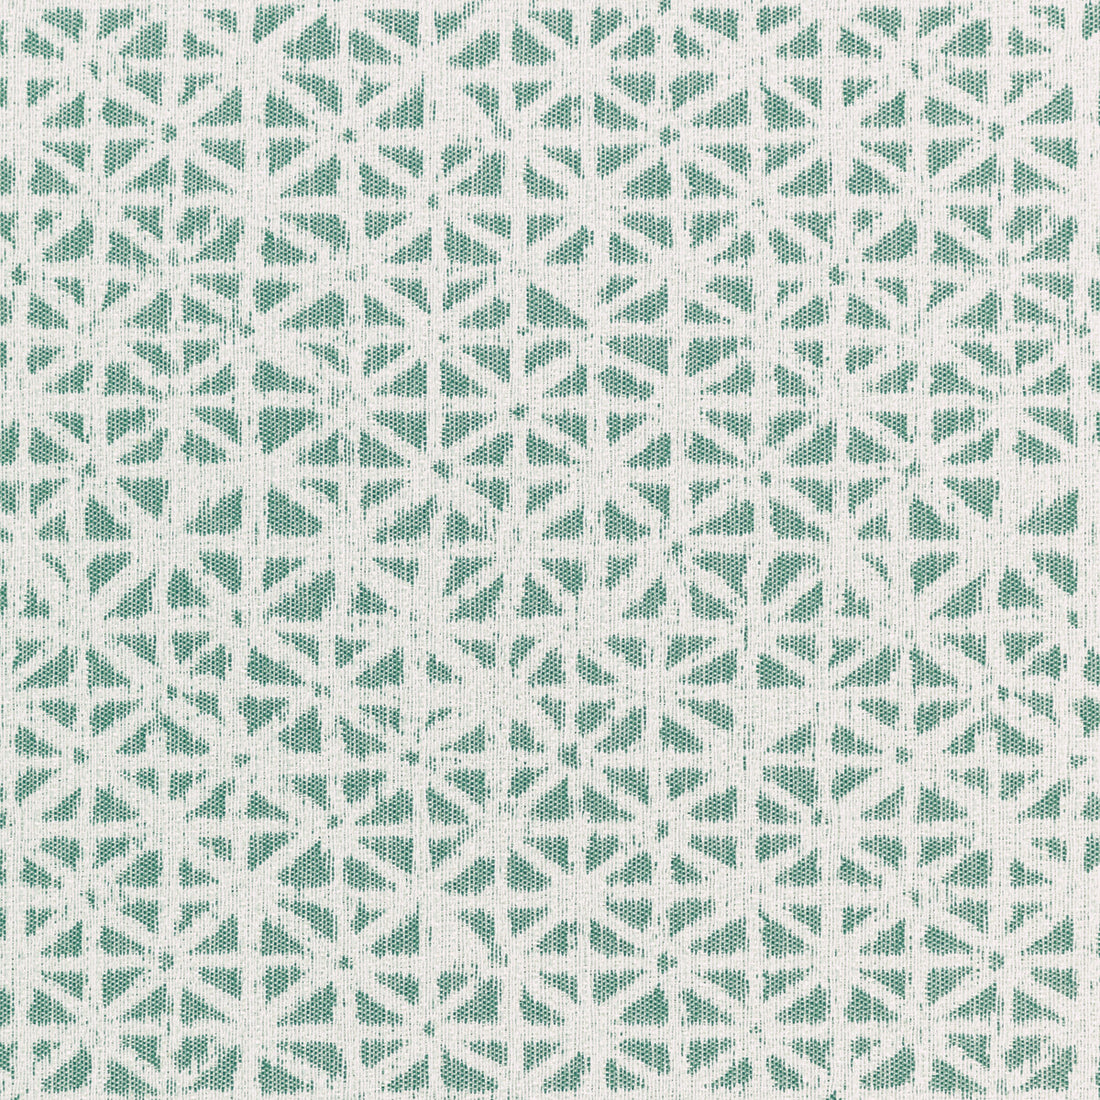 Kinzie fabric in sea green color - pattern 36268.135.0 - by Kravet Contract in the Gis Crypton collection